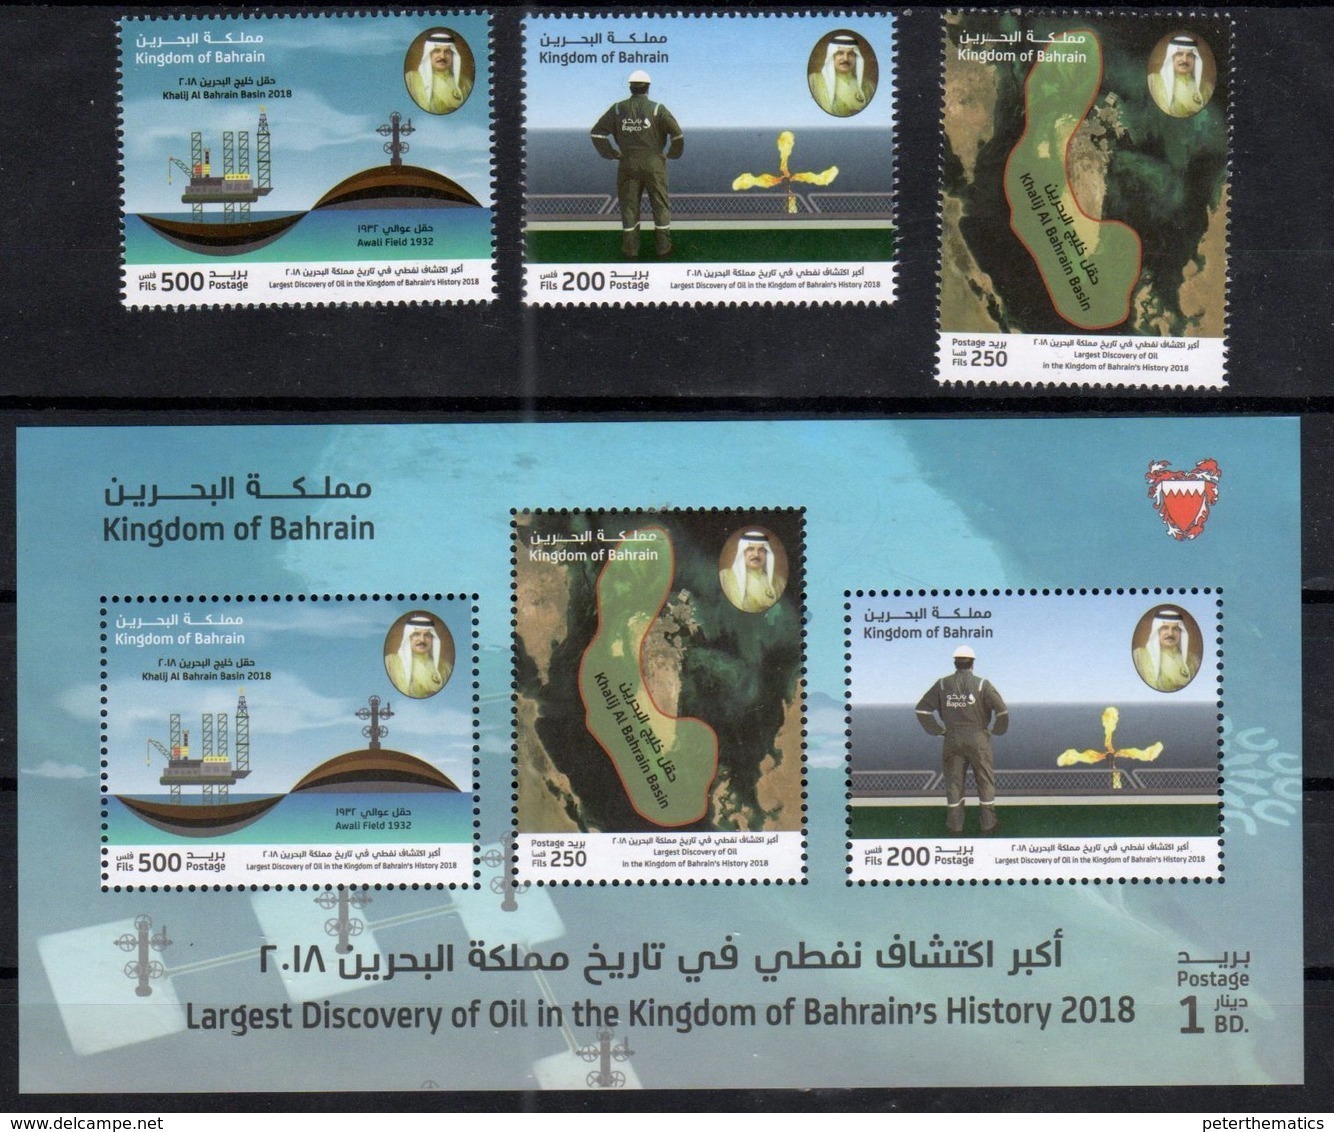 BAHRAIN, 2018, MNH, OIL, LARGEST DISCOVERY OF OIL IN BAHRAIN HISTORY, MAPS, 3v+SHEETLET - Oil